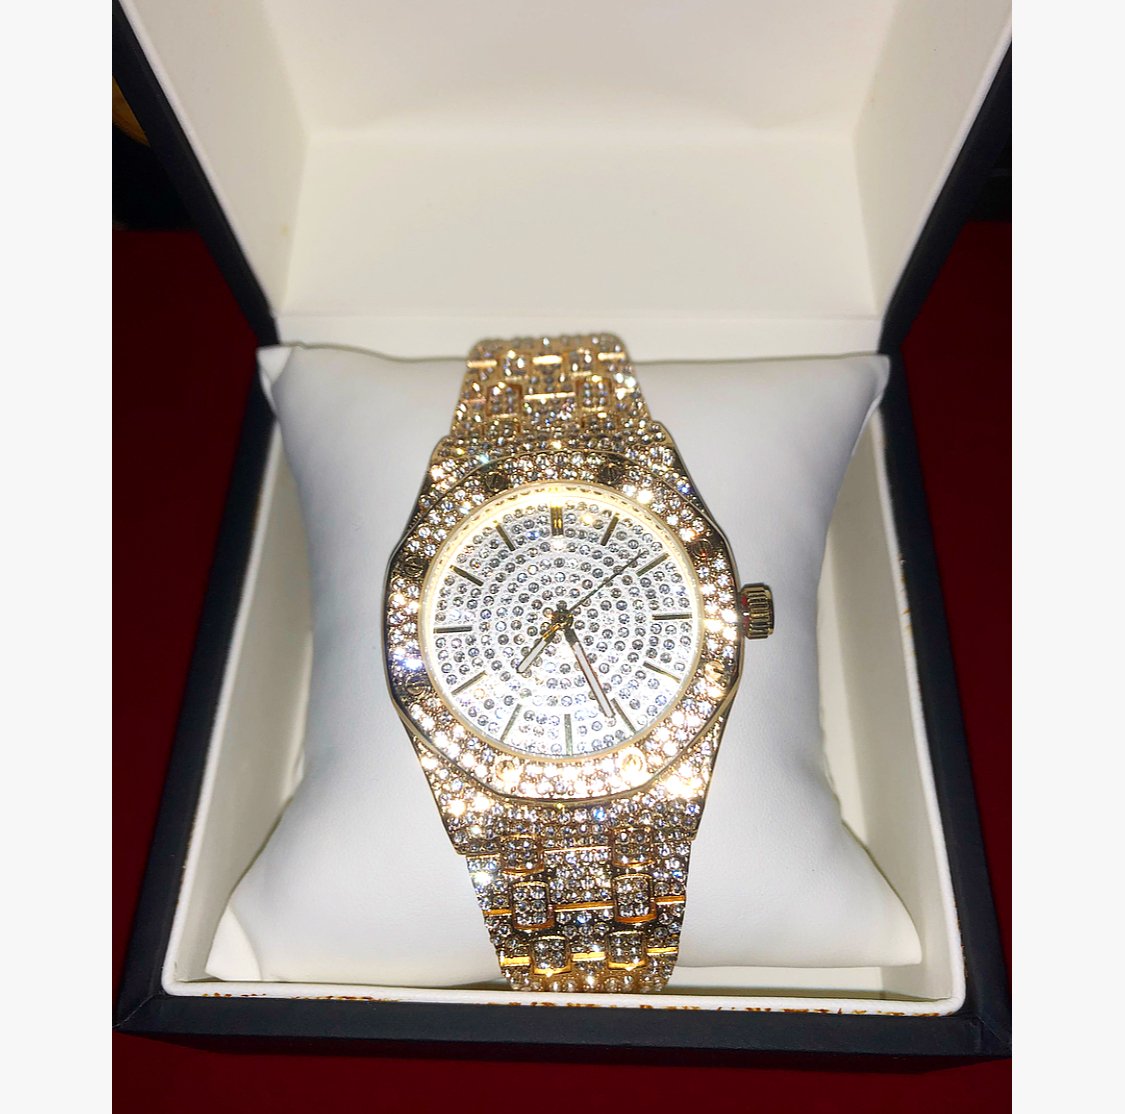 My Billionaire Lifestyle — Super Icy Watch in Gift Box